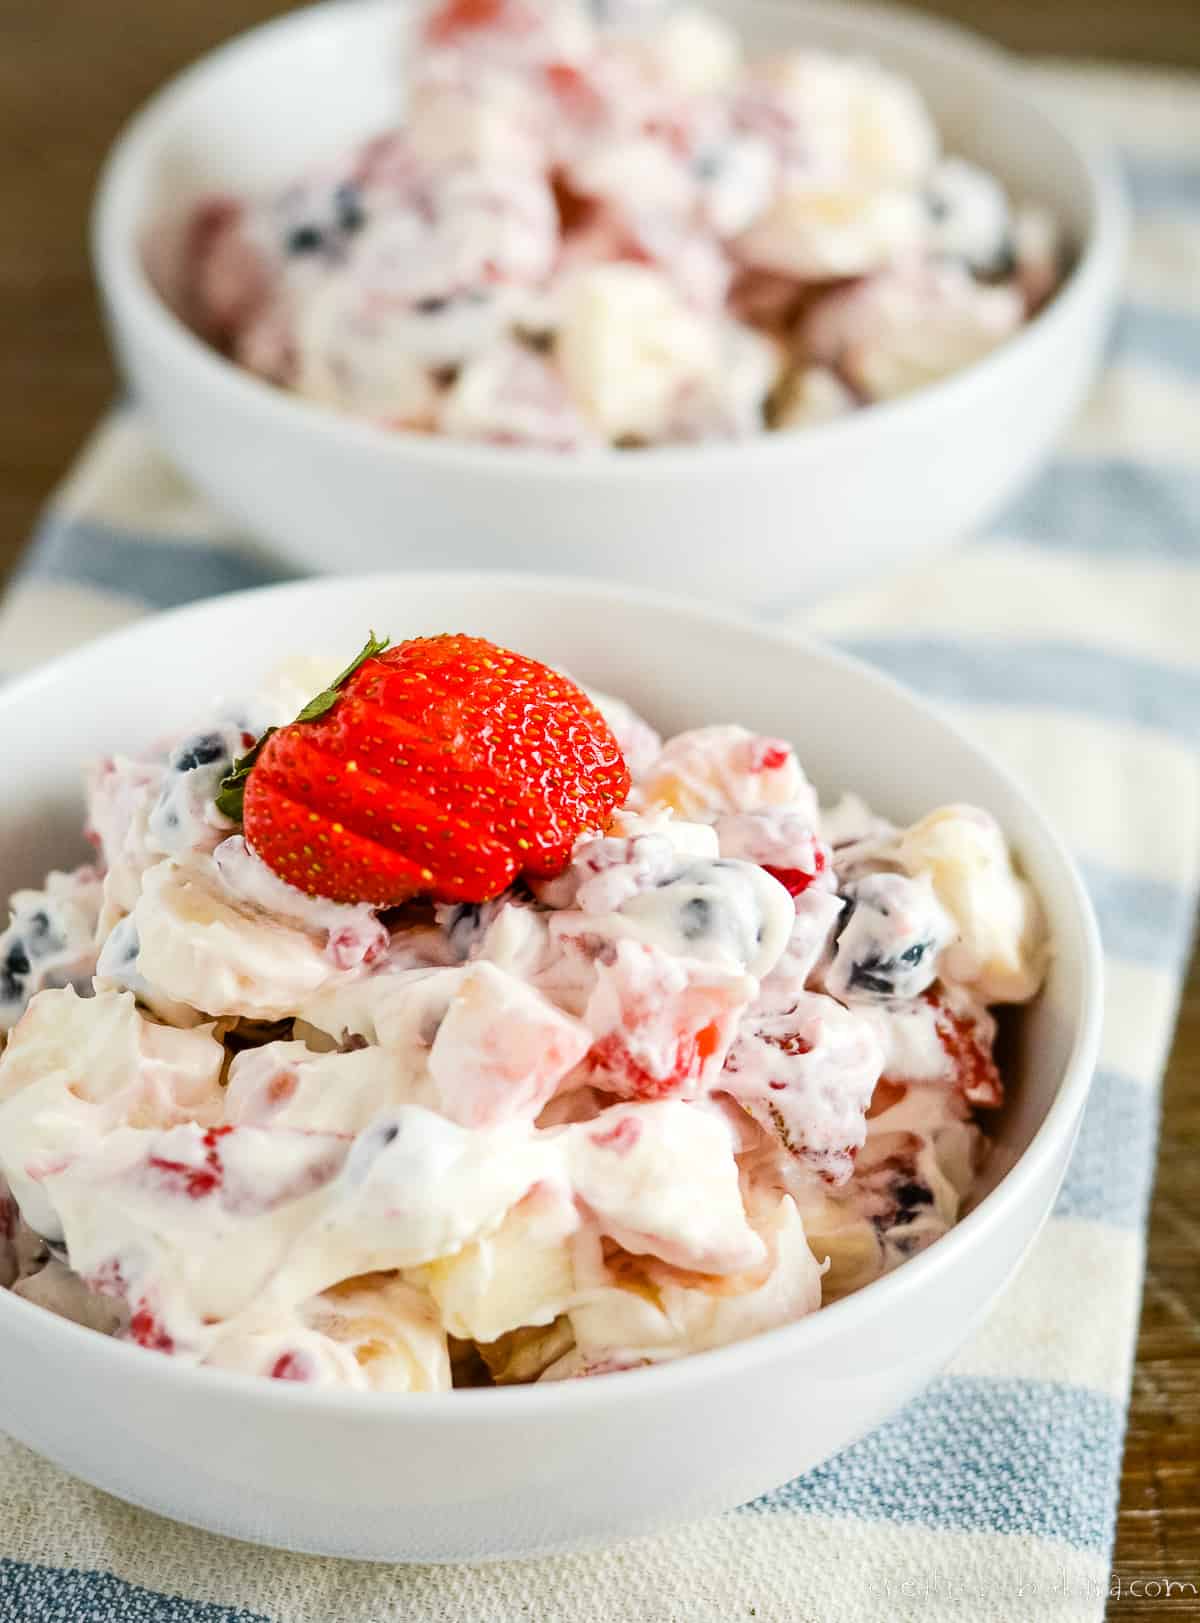 two bowls of cheesecake fruit salad on a striped kitchen towel